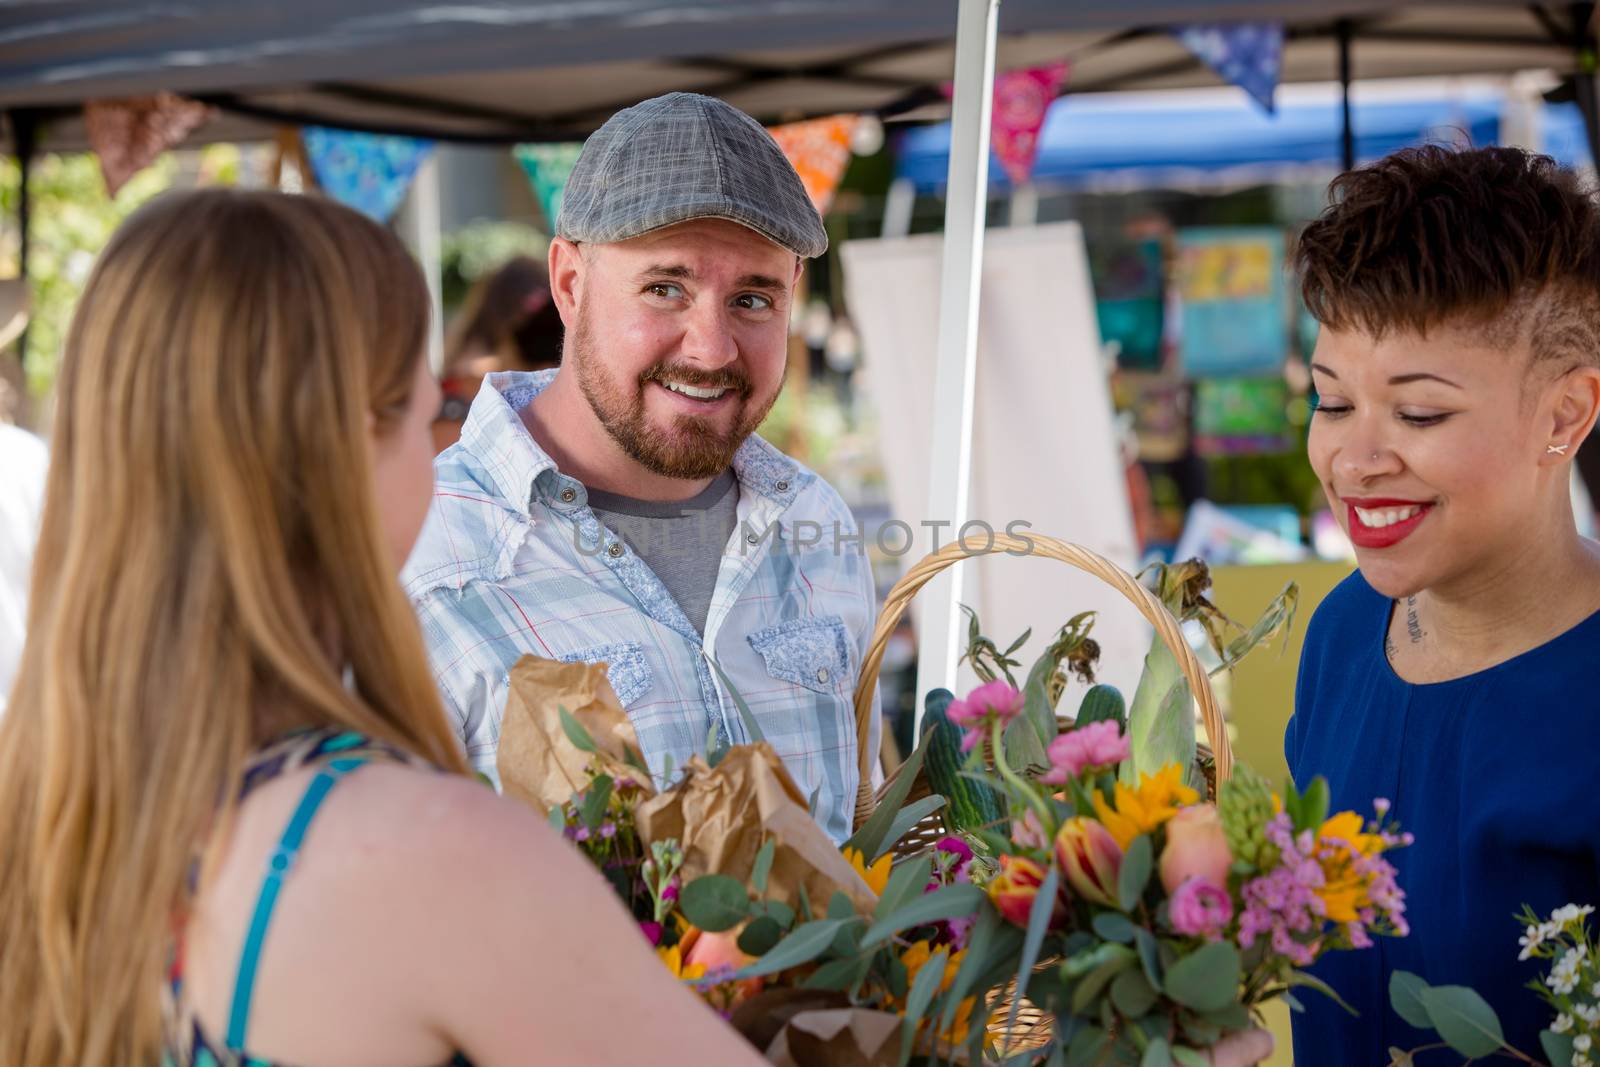 Couple shopping for flowers at outdoor farmers market